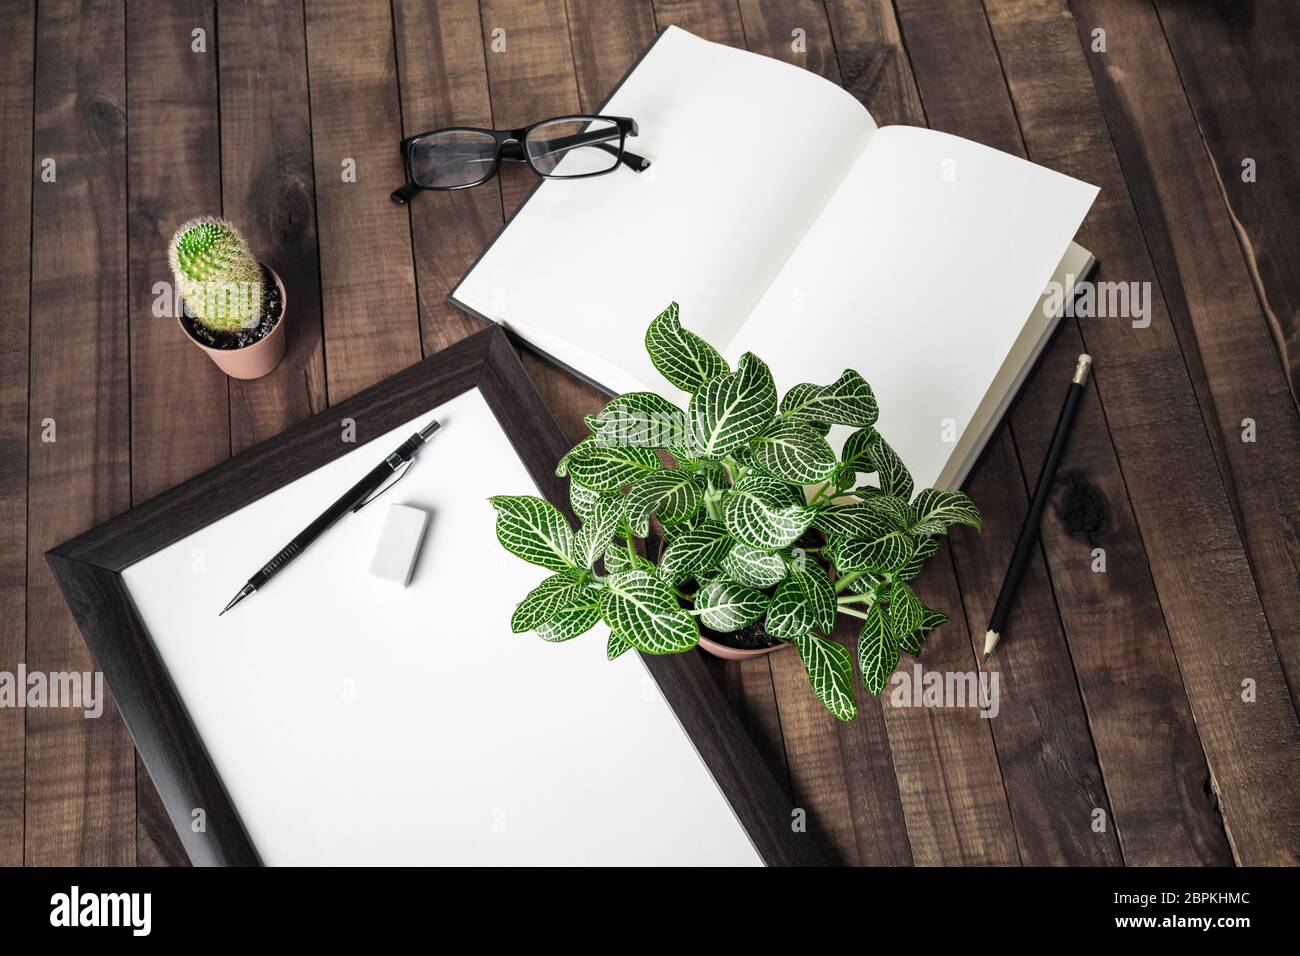 Blank book, photo frame, stationery and plants on wooden background. Stock Photo